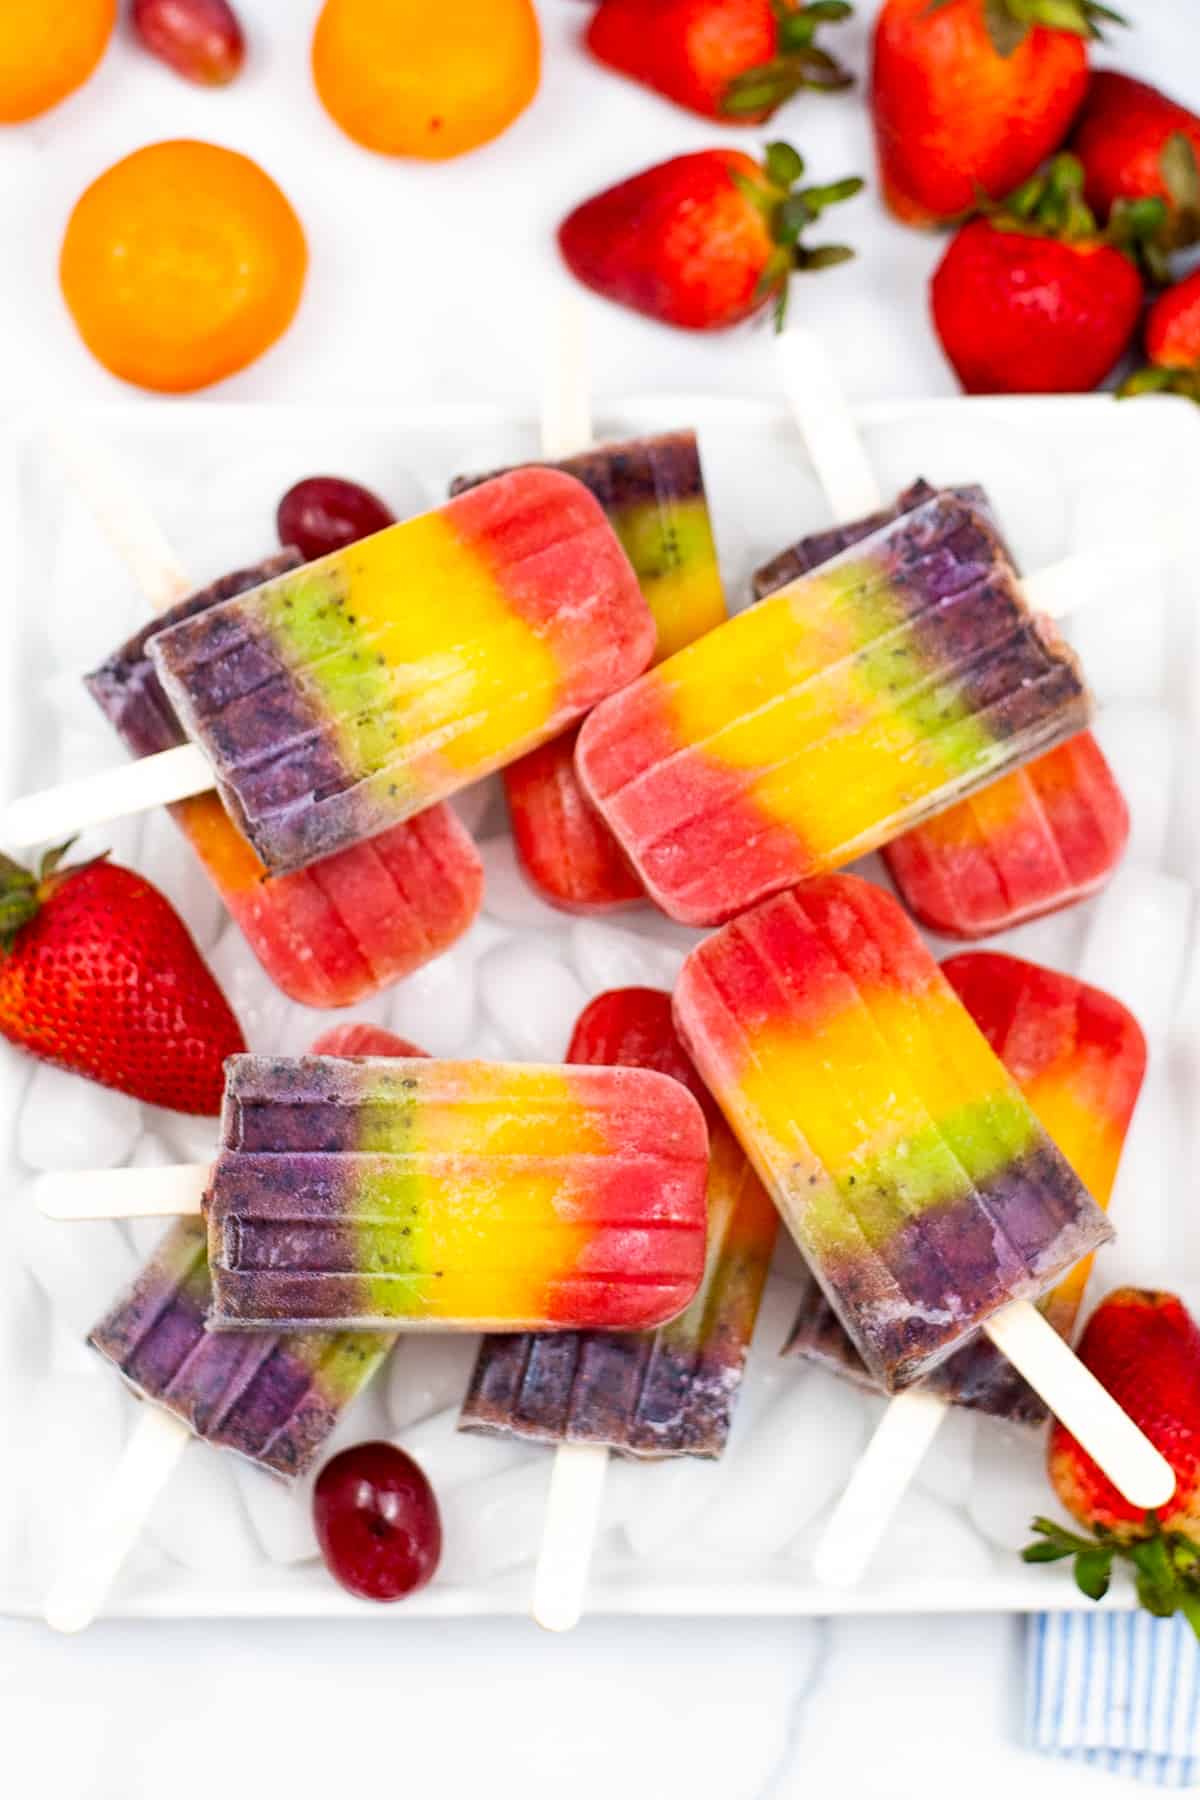 Bright and colorful rainbow fruit popsicles served on a bed of ice on a white plate. Mandarin oranges, strawberries, and grapes surround the plate.